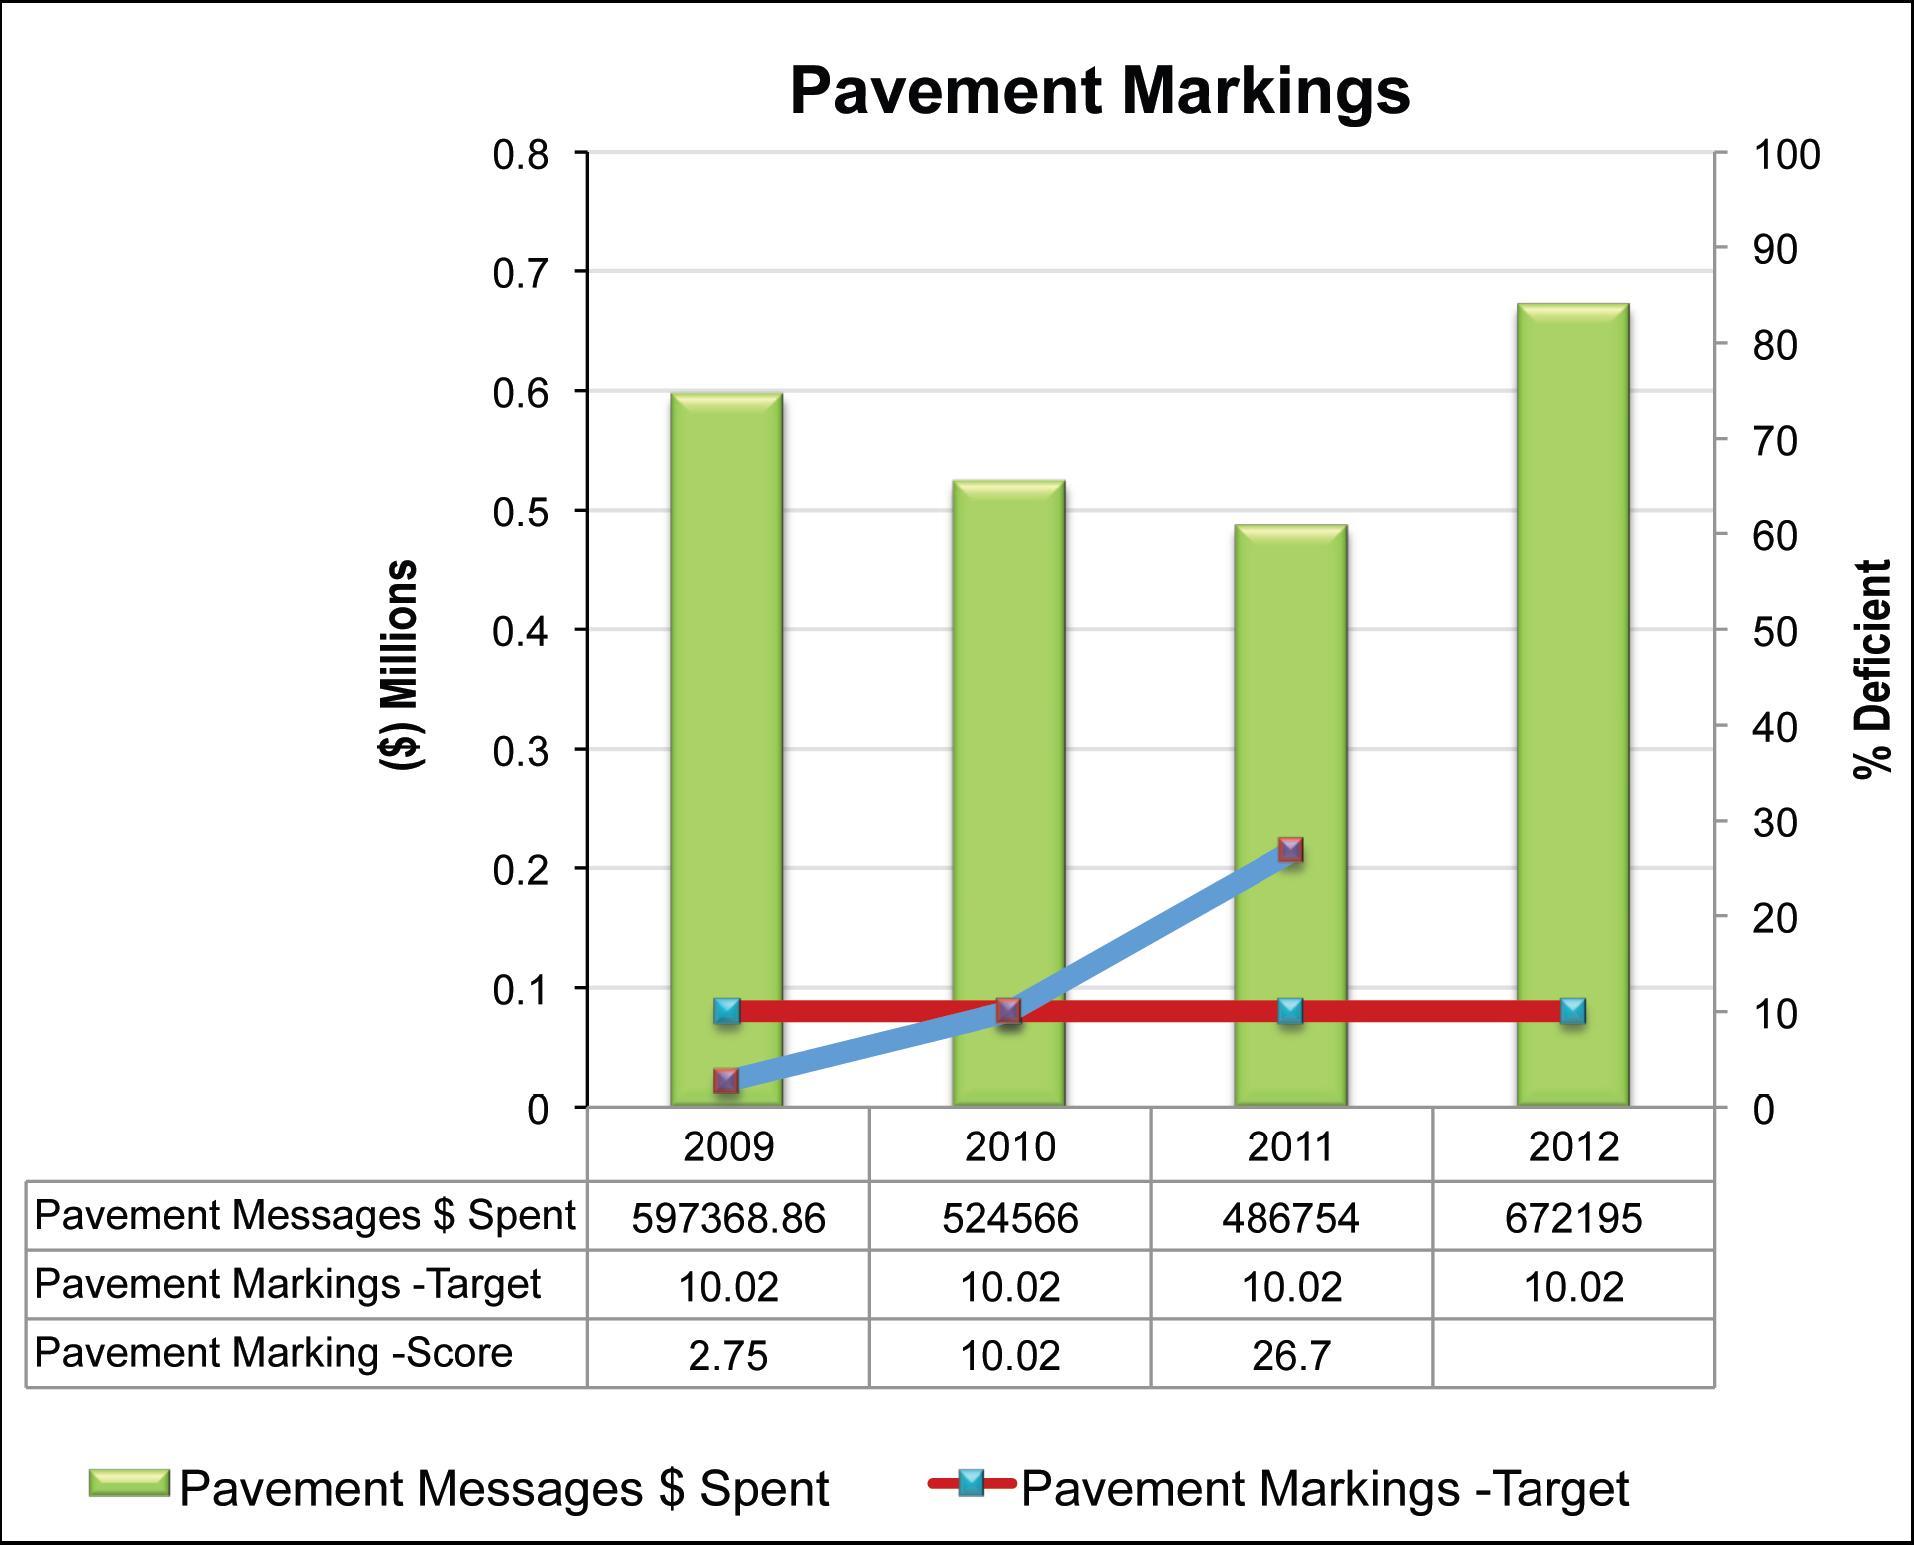 Figure 53 illustrates pavement marking expenditures, the target and the actual scores for the years 2009 through 2012.  The expenditures range in the four years from a low of 486 thousand dollars to a high of 672 thousand. The target is to have no more than 10 percent deficient. The actual scores in 2009 were better than the target but deficiencies rose in 2010 and in 2011 so that by 2011 the deficiencies were more than allowed. The deficiencies were at 26 point 7 percent in 2011, compared to the target of 10 percent. Expenditures were increased in 2012 following the increase in deficiencies. 2012 expenditures are scheduled for the highest in the four year period at 672 thousand dollars.